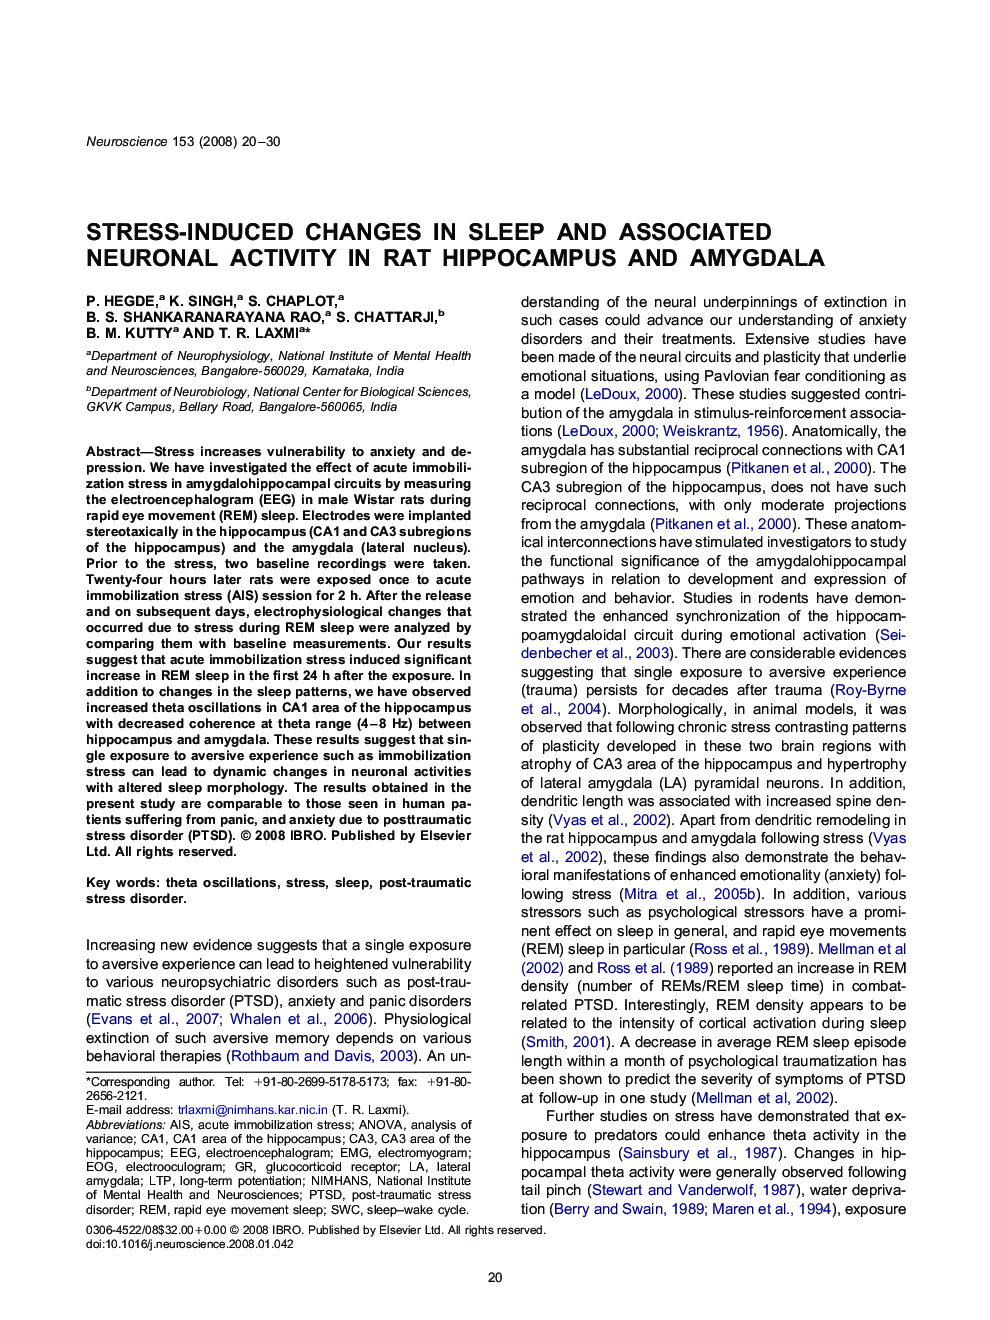 Stress-induced changes in sleep and associated neuronal activity in rat hippocampus and amygdala